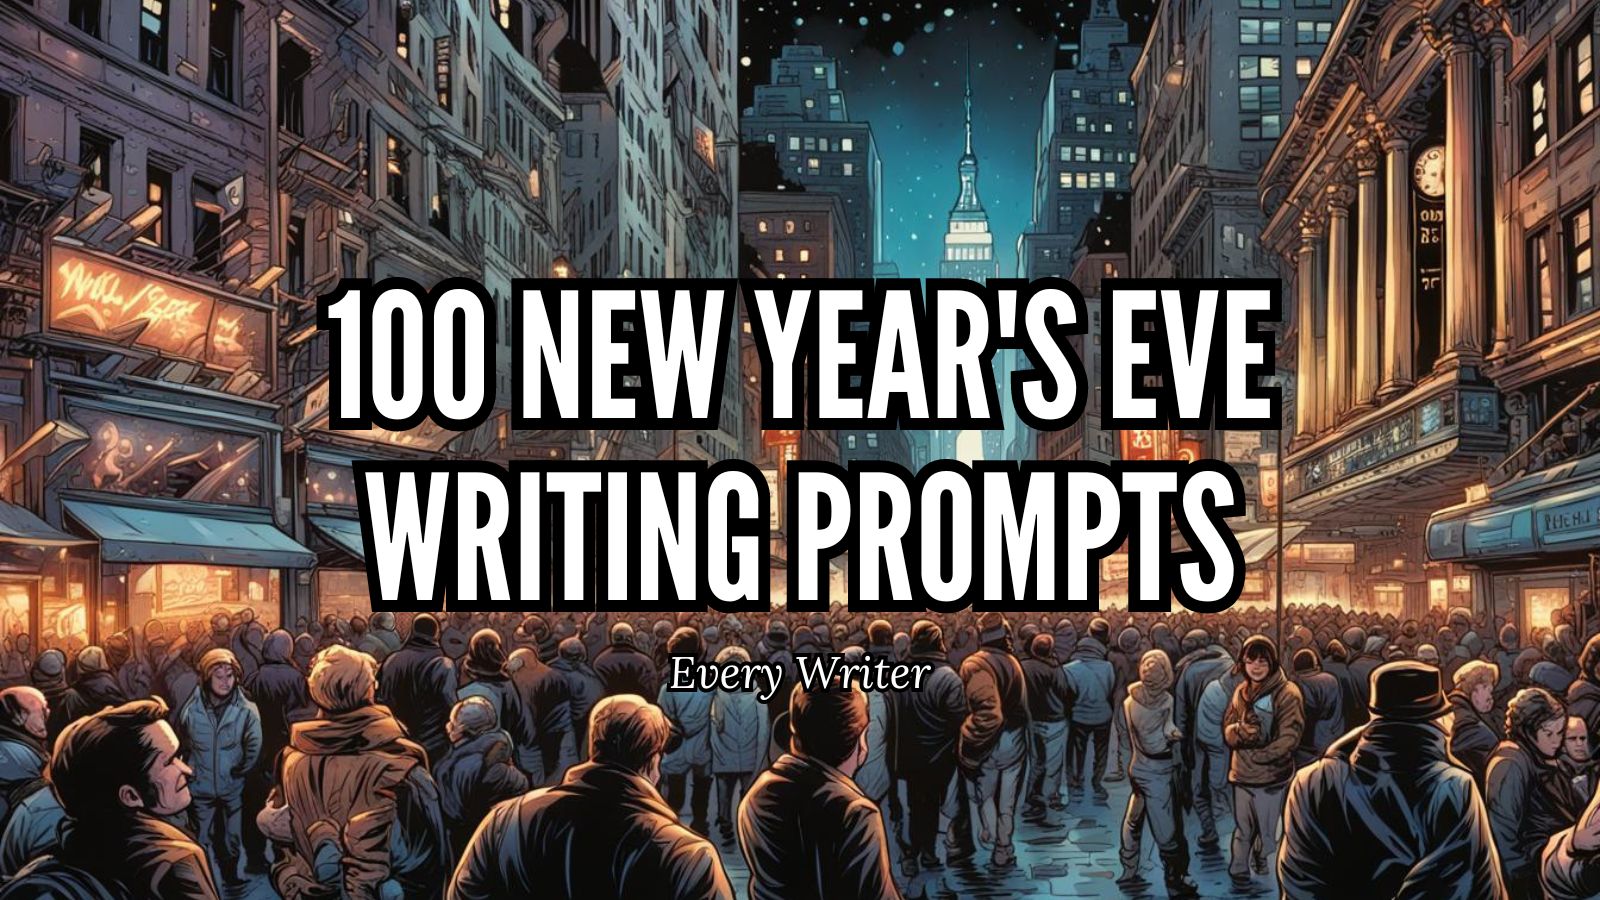 100 New Year's Eve writing prompts